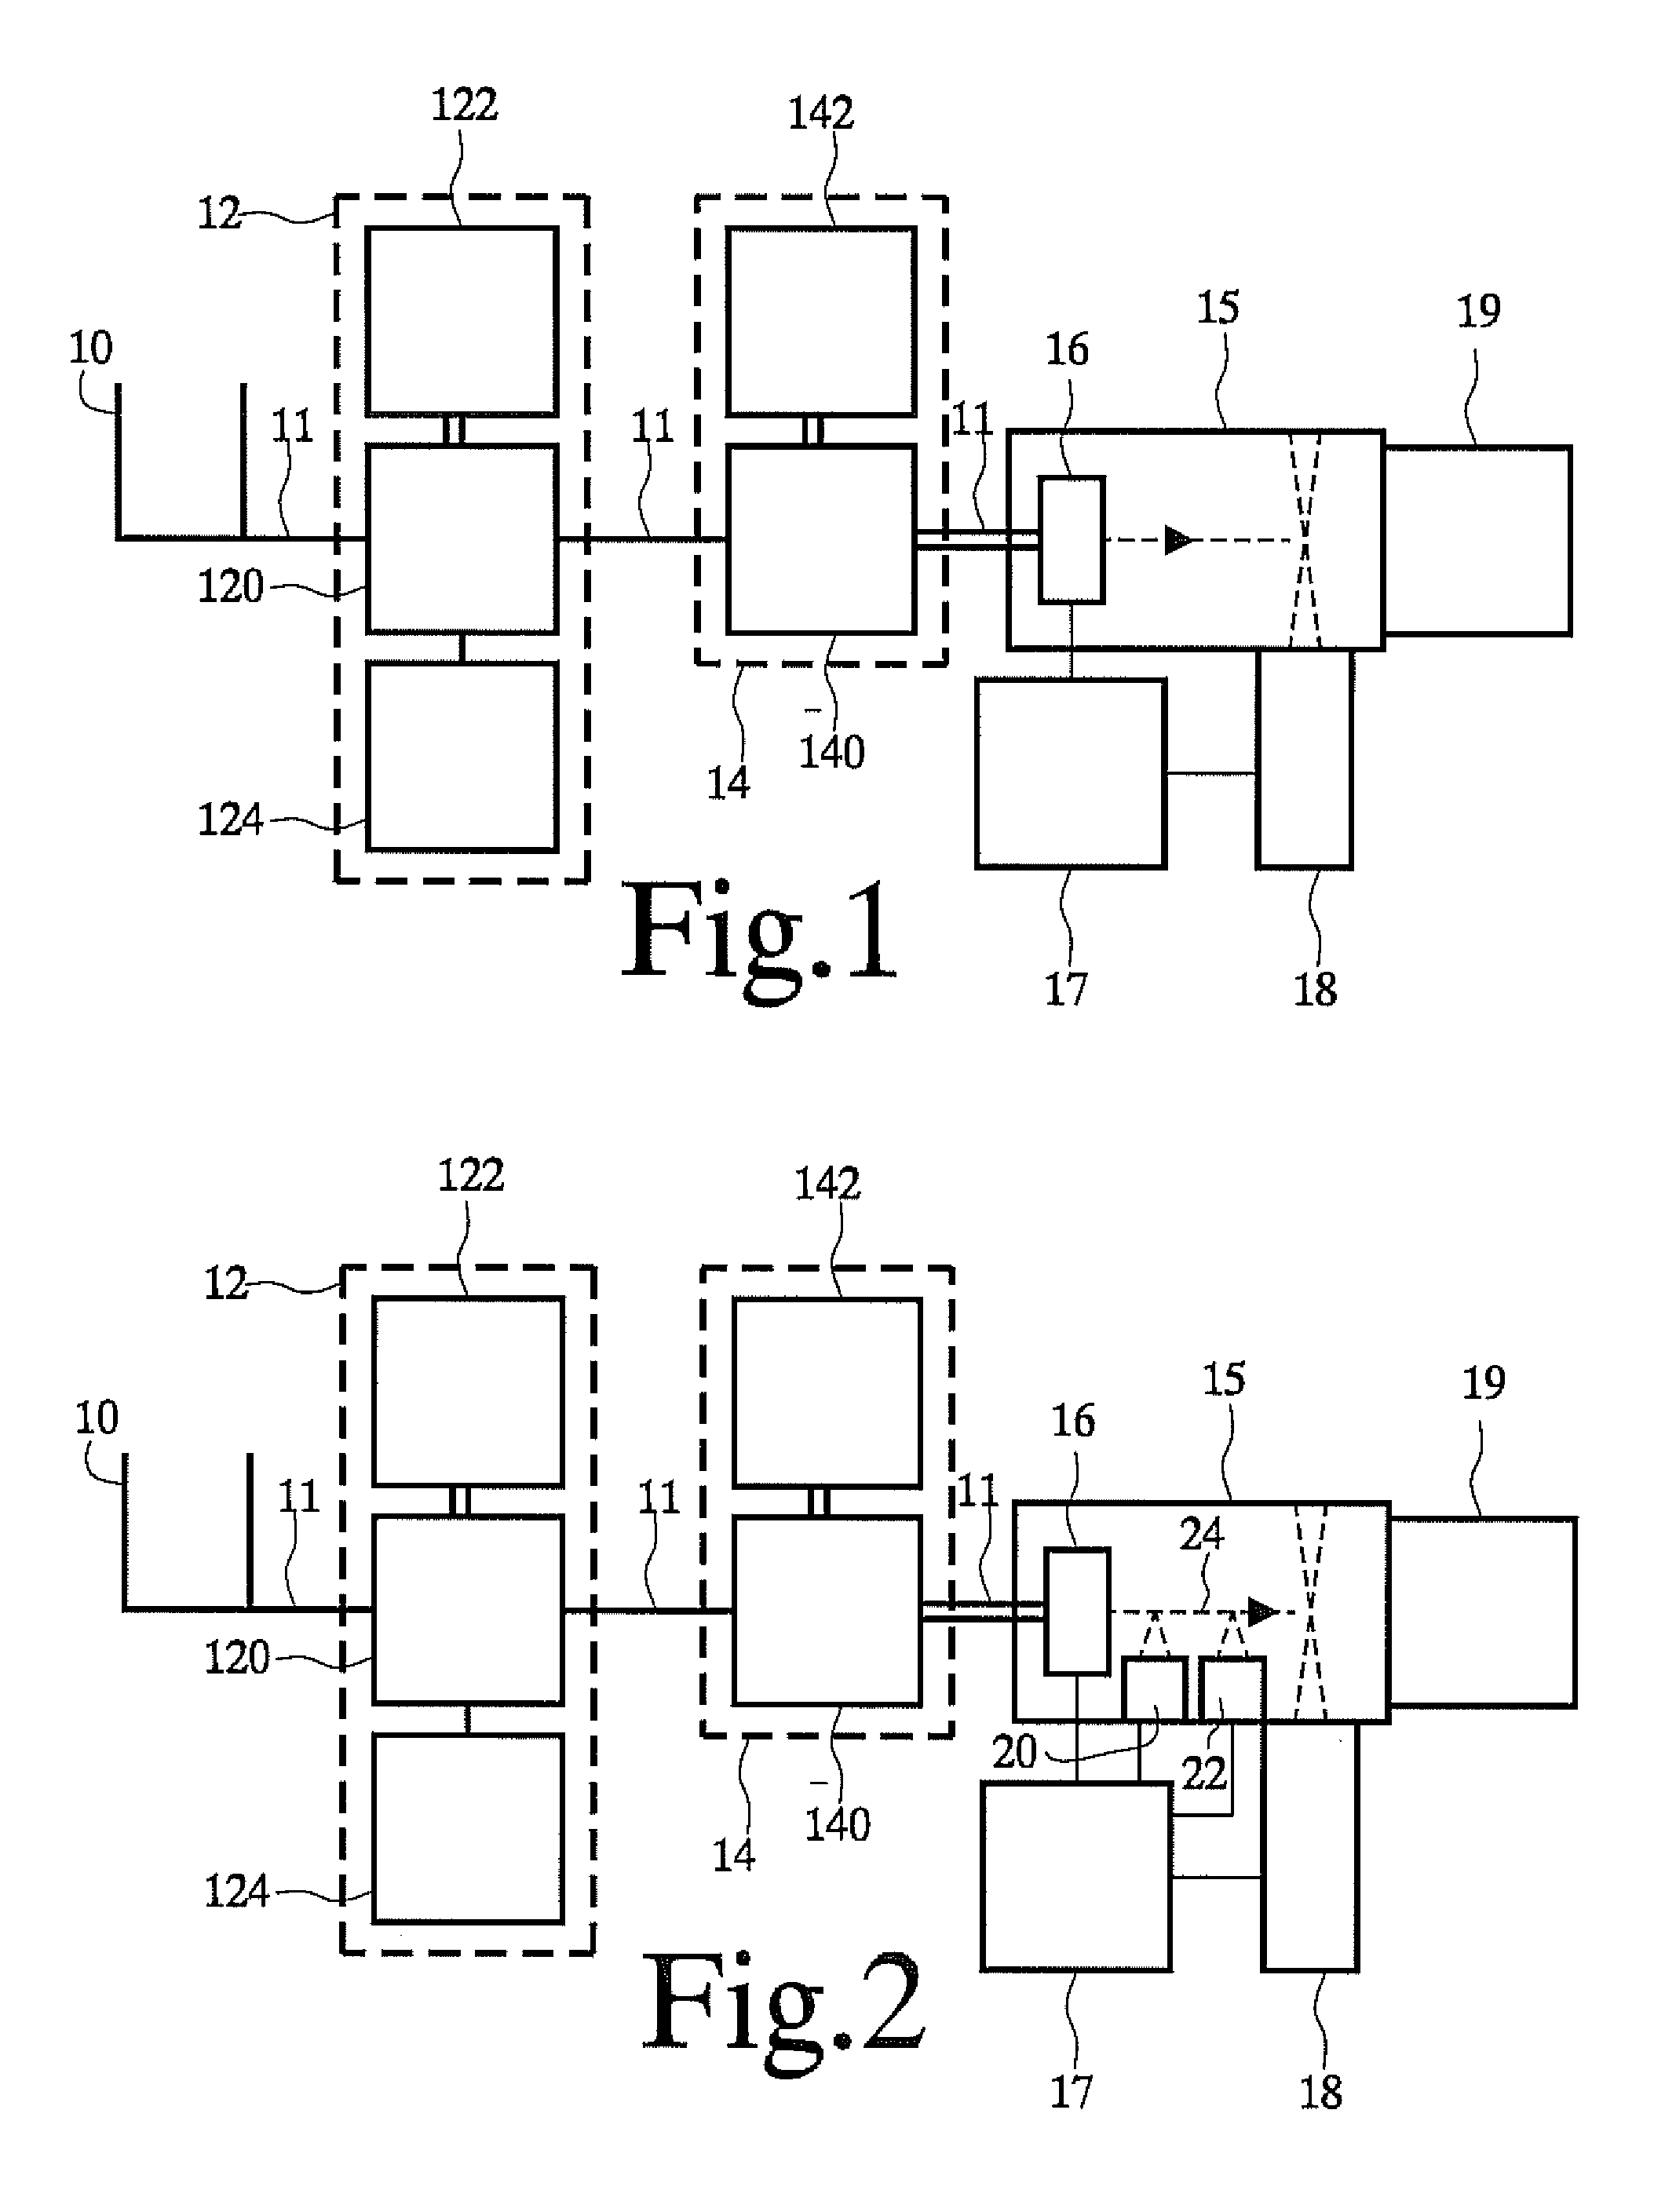 Method and Apparatus for Identification of Biological Material